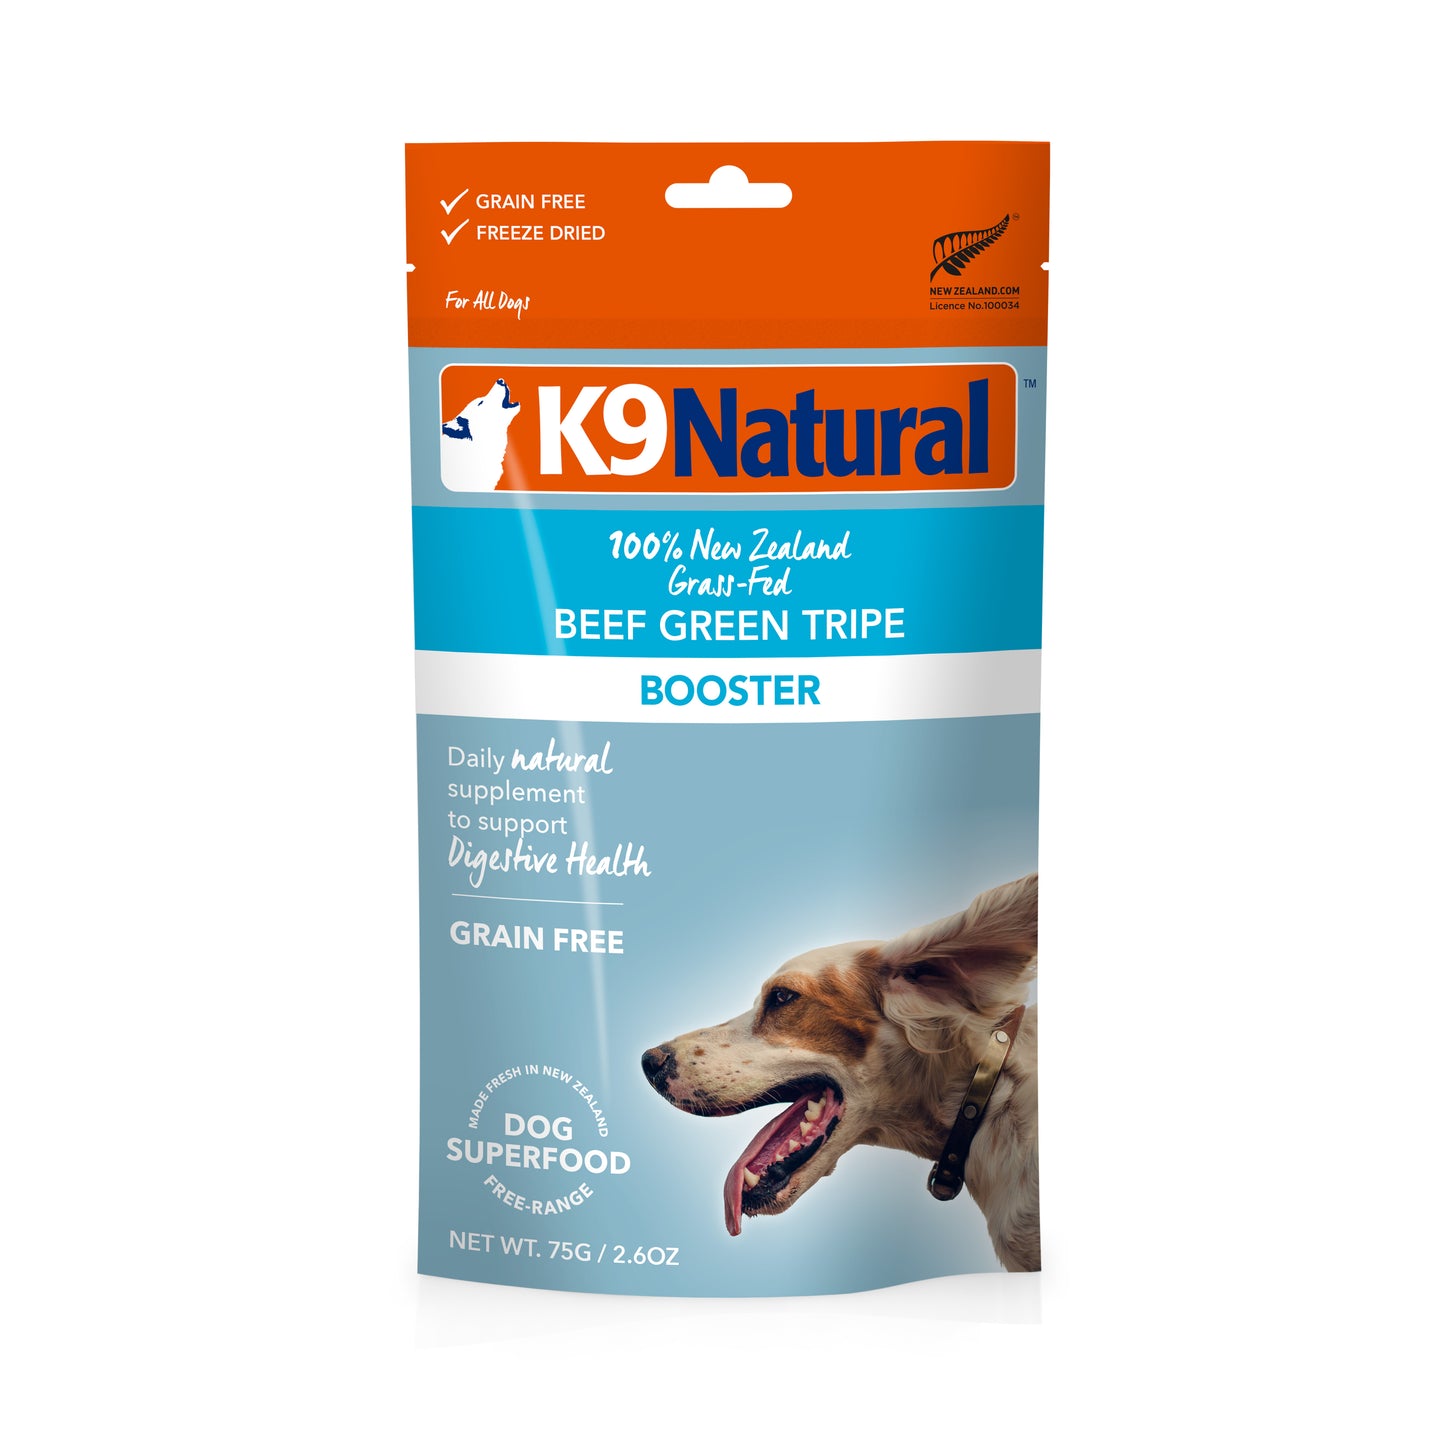 K9 Natural Freeze Dried Beef Green Tripe Booster Dog Food Topper (2 Sizes)